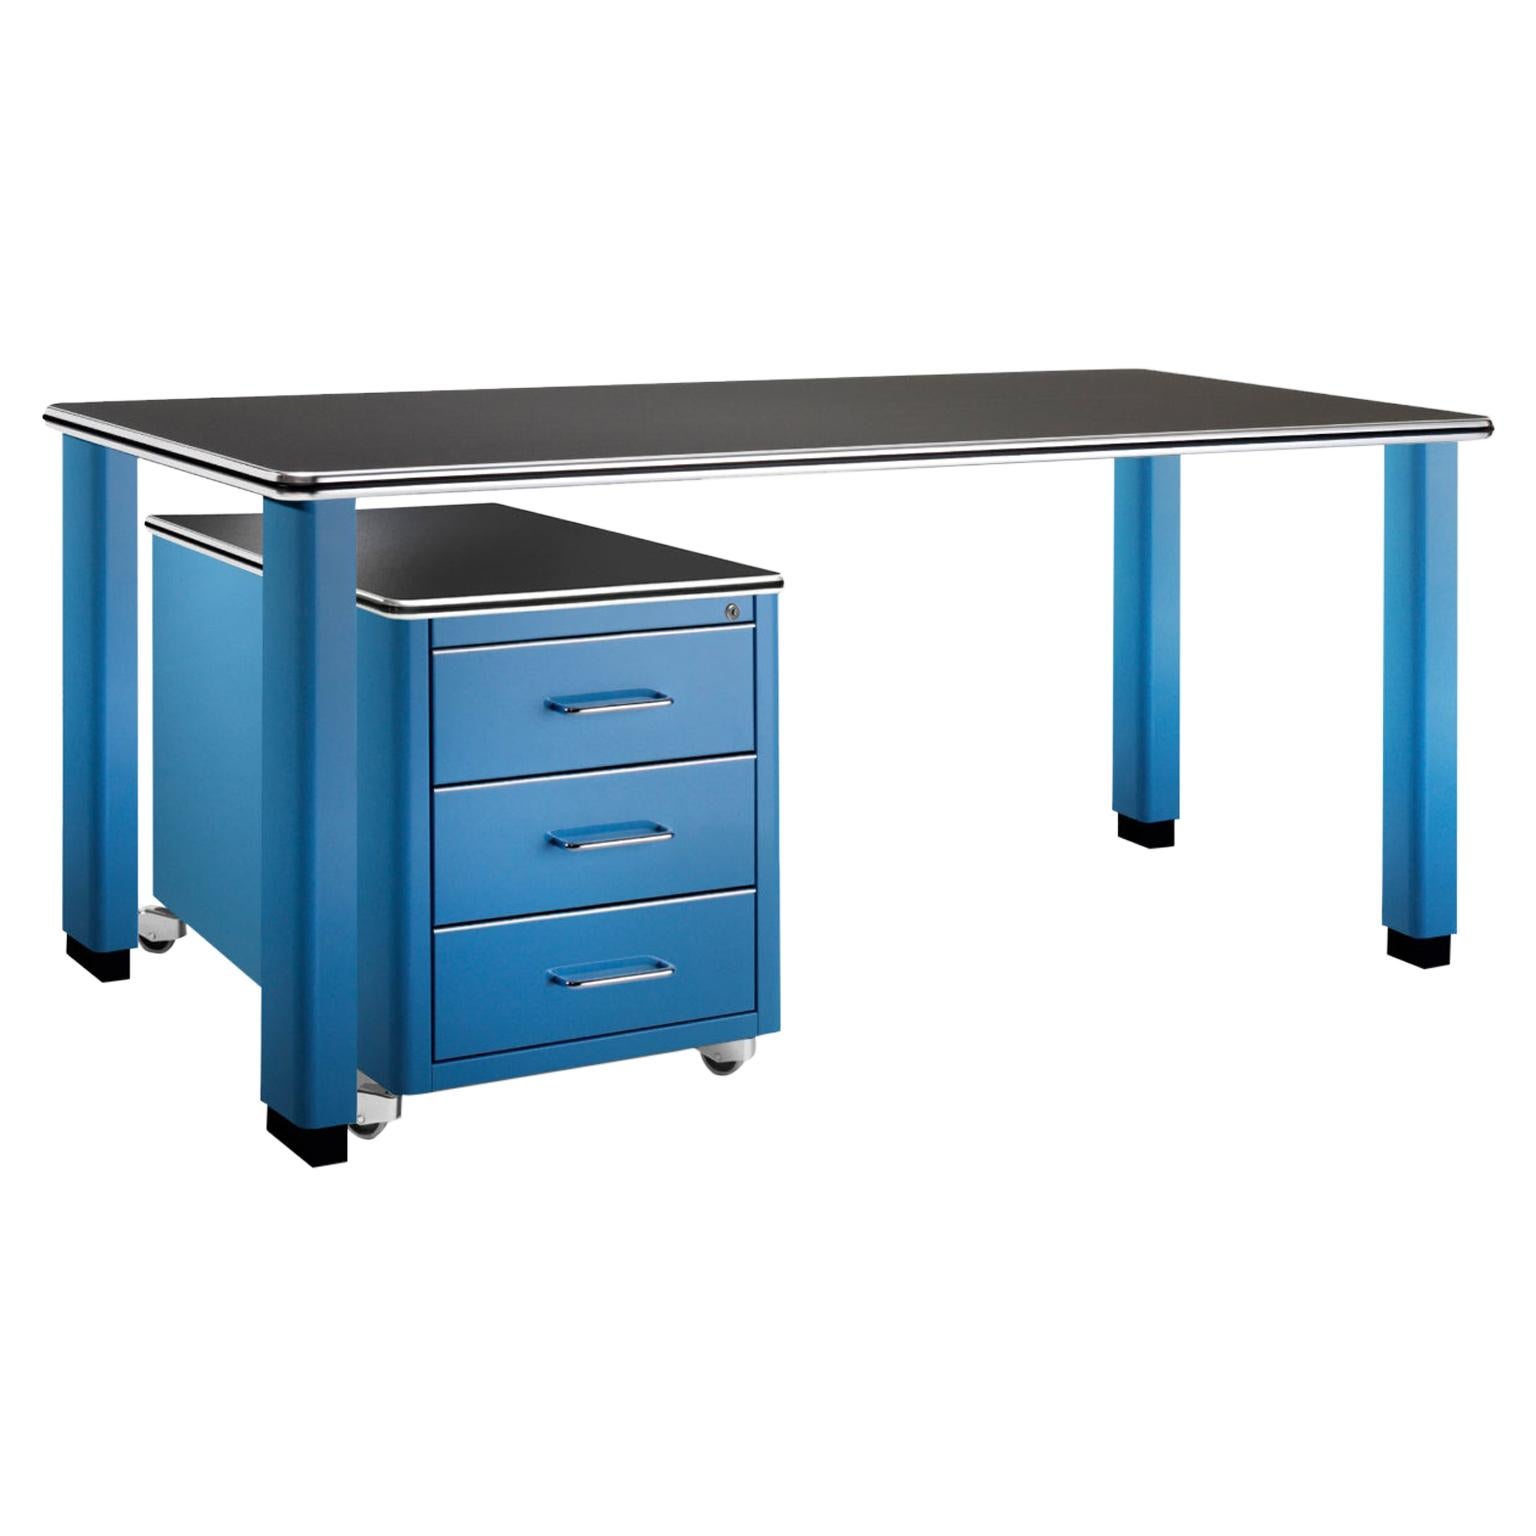 GMD Berlin Industrial and Work Tables